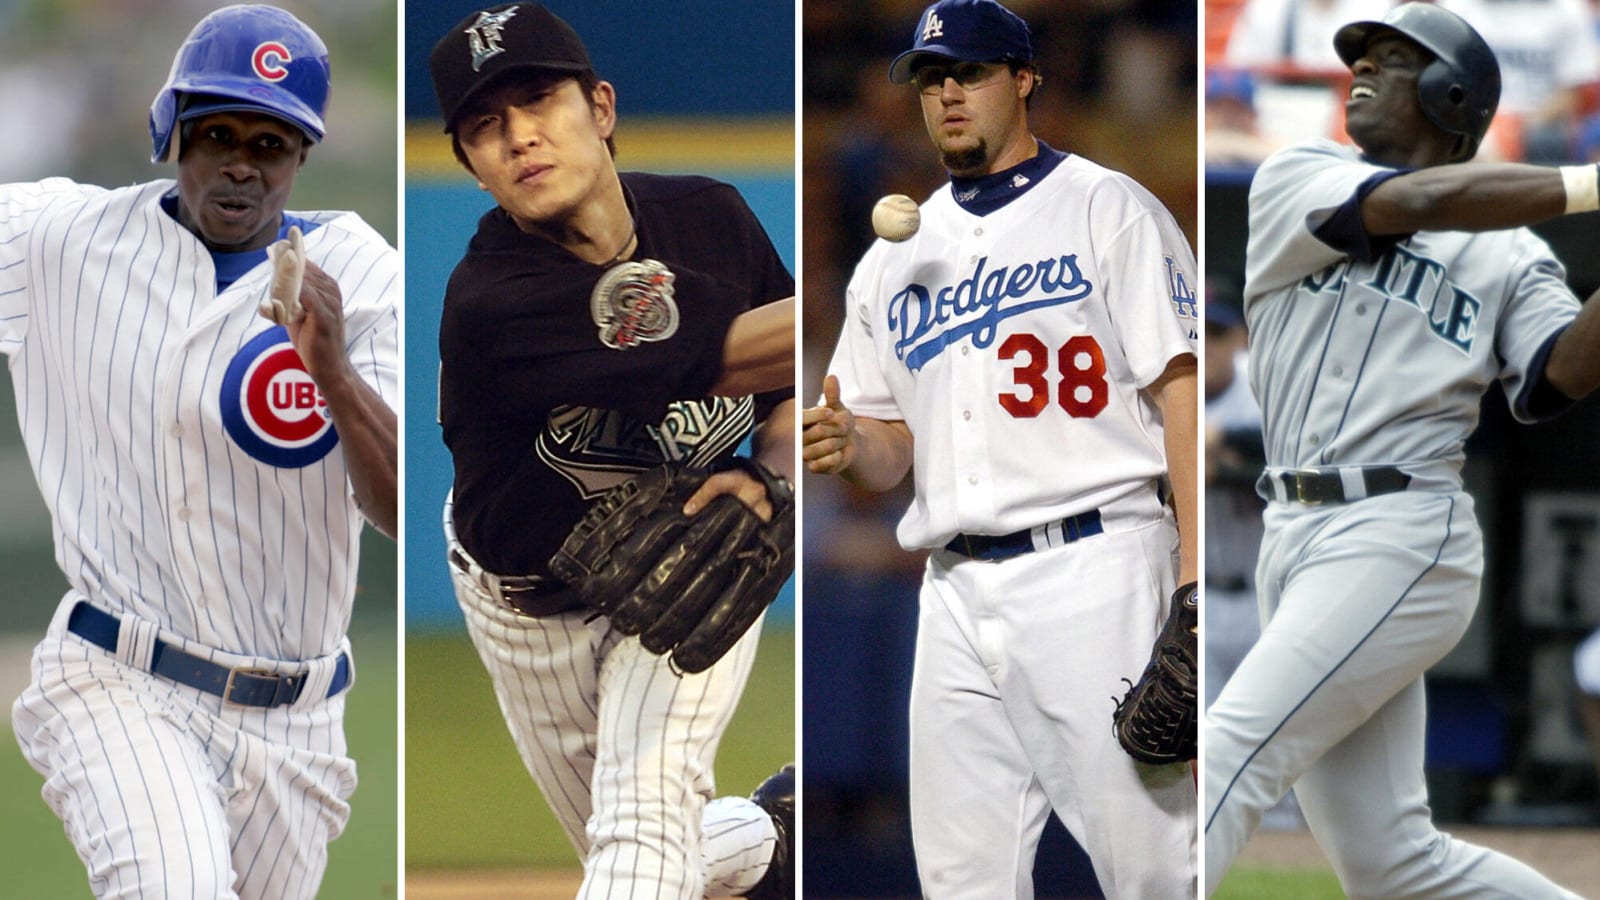 Best Dodgers Players Of All Time: Top 5 Legendary Athletes, According To  Baseball Experts - Study Finds